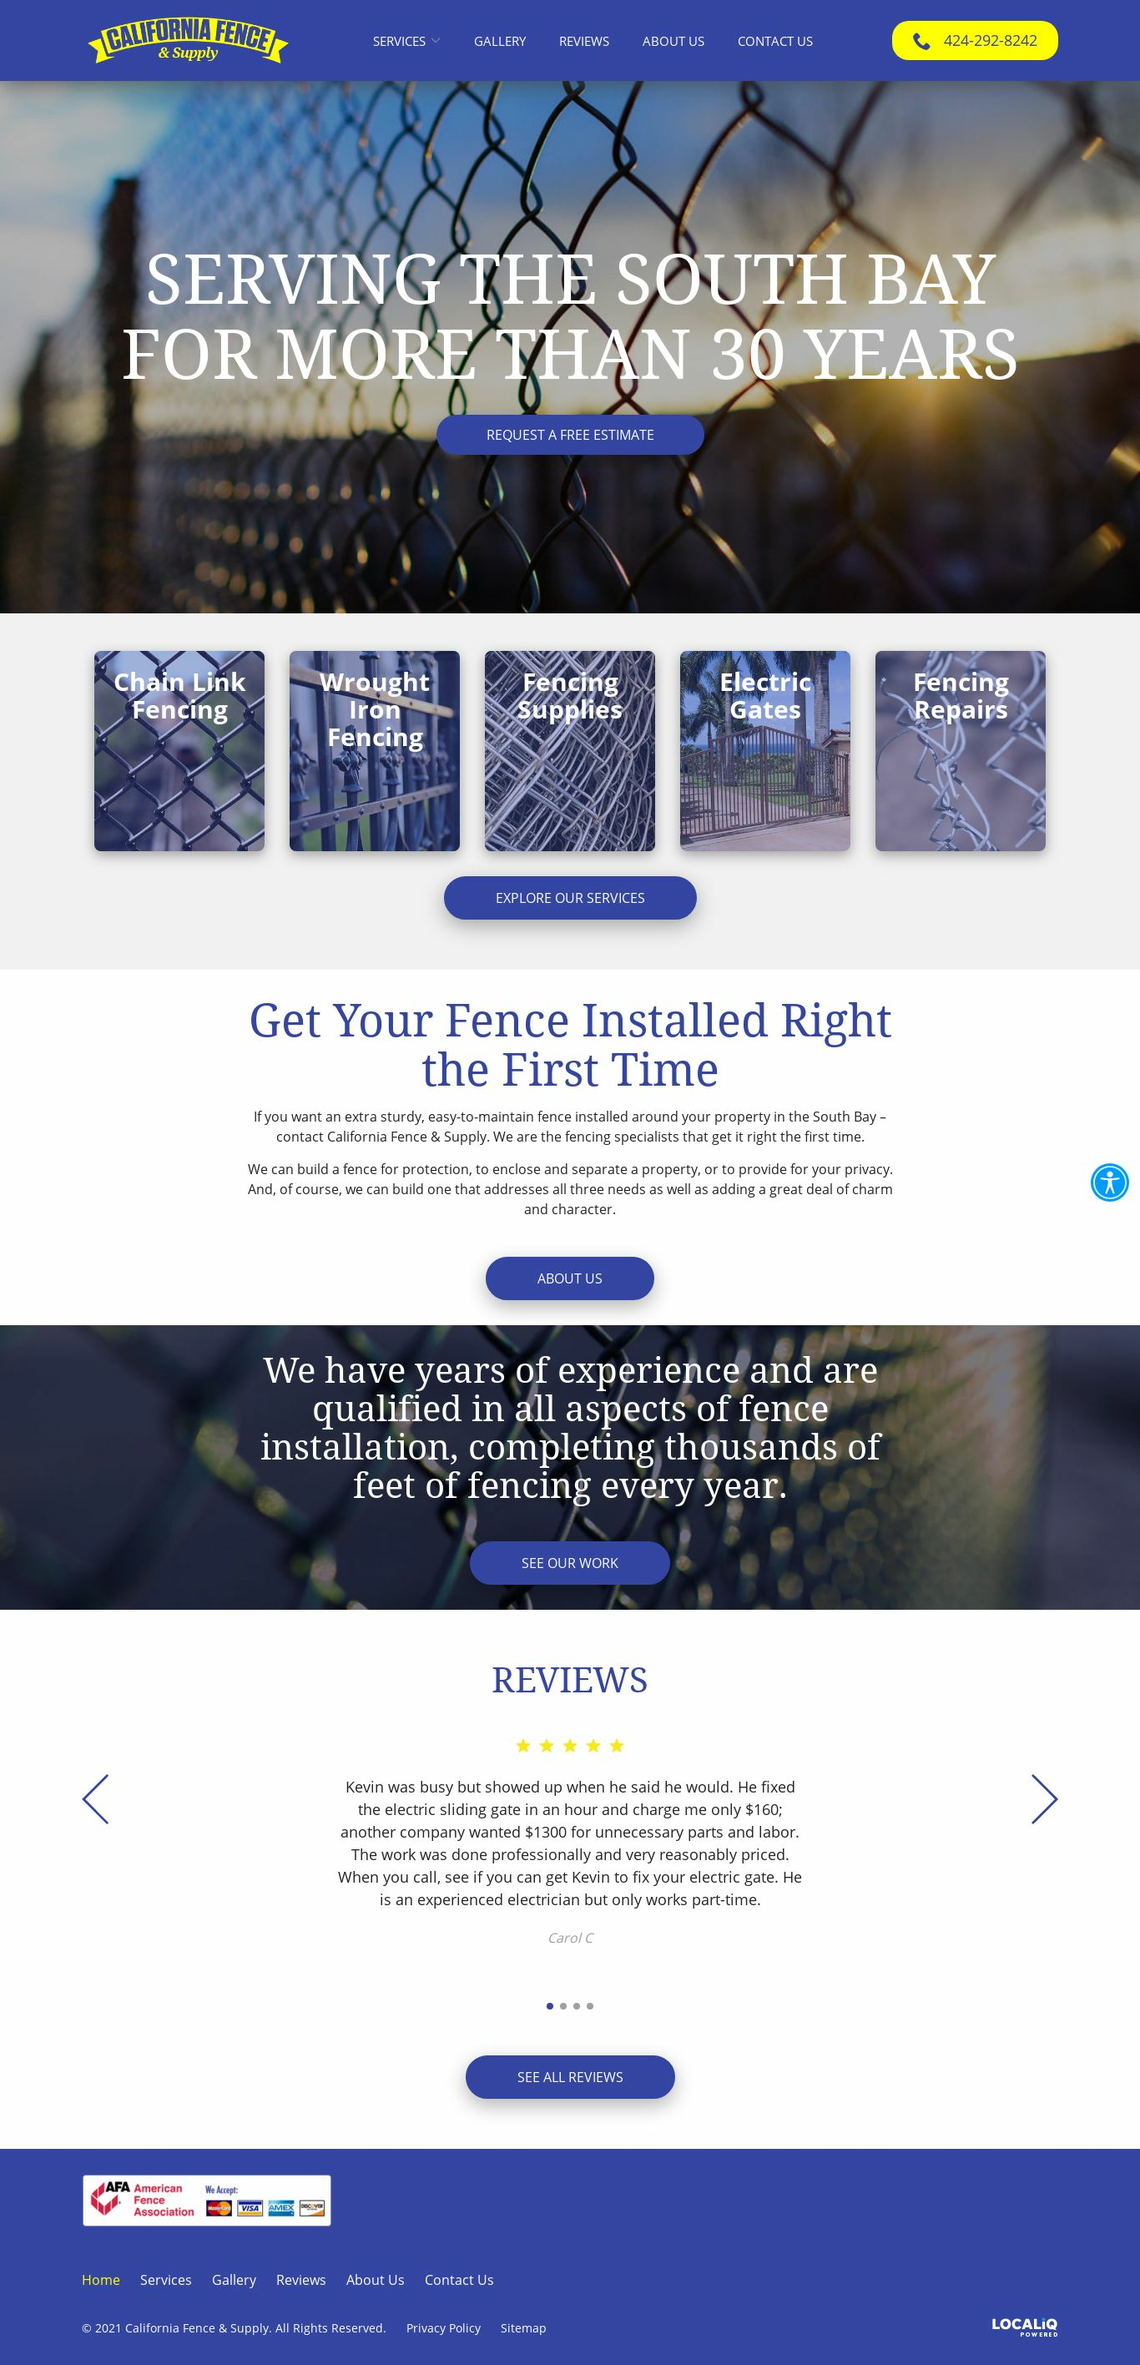 Landing Page Template for Fence Installation - californiafenceandsupply.com